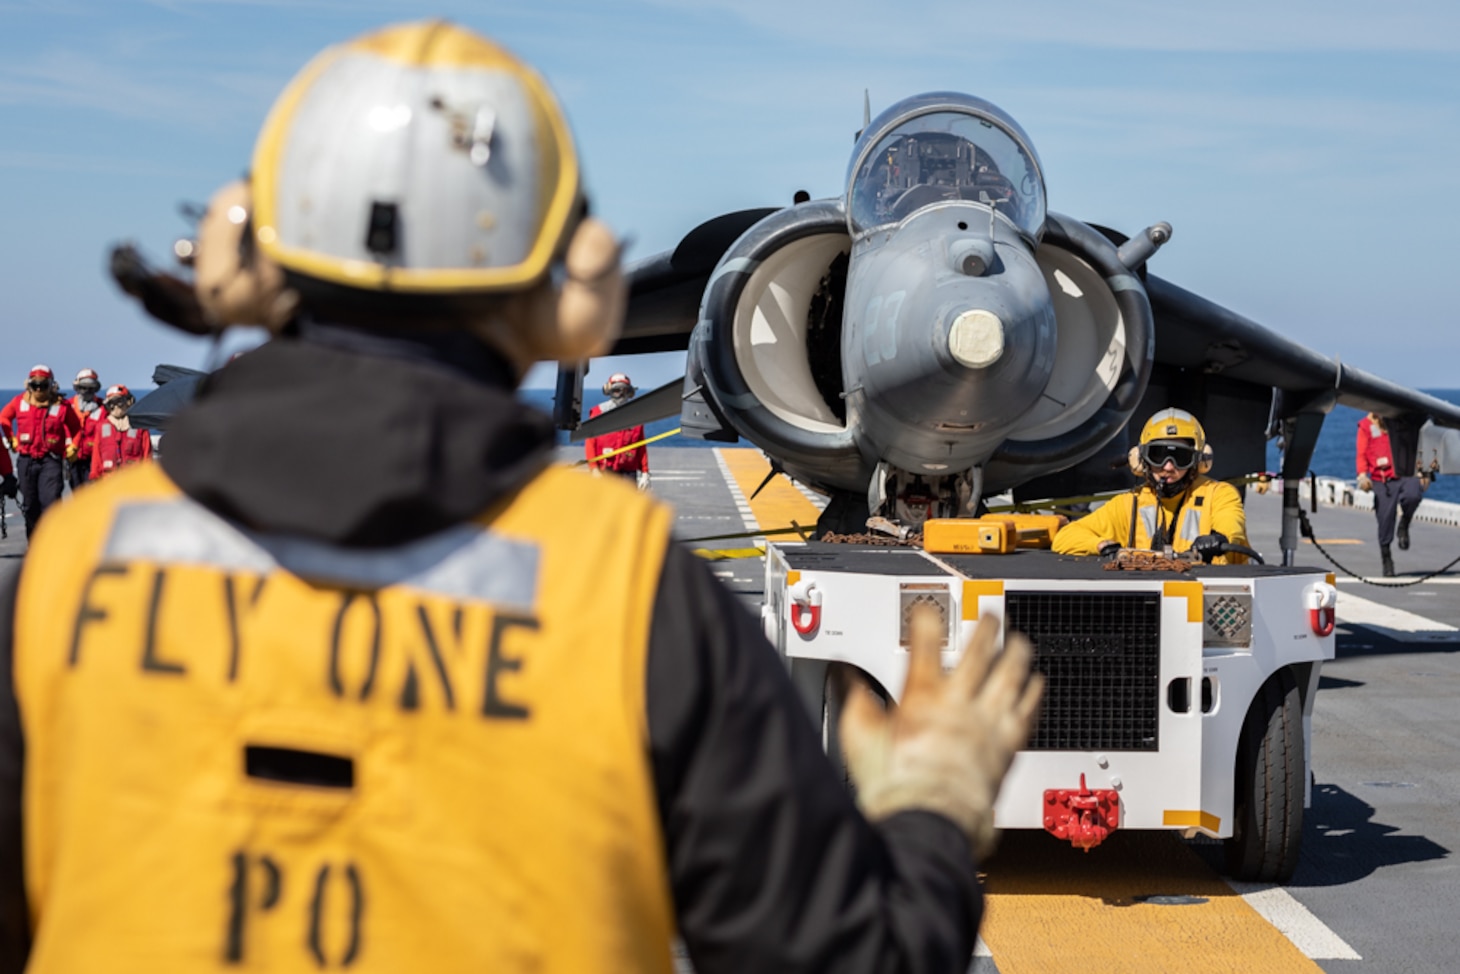 Aviation Boatswain's Mate (Handling) 2nd Class Jordan Larson guides a tow tractor driven by Aviation Boatswain's Mate (Handling) Airman Chad O'Connor during a drill on the flight deck.